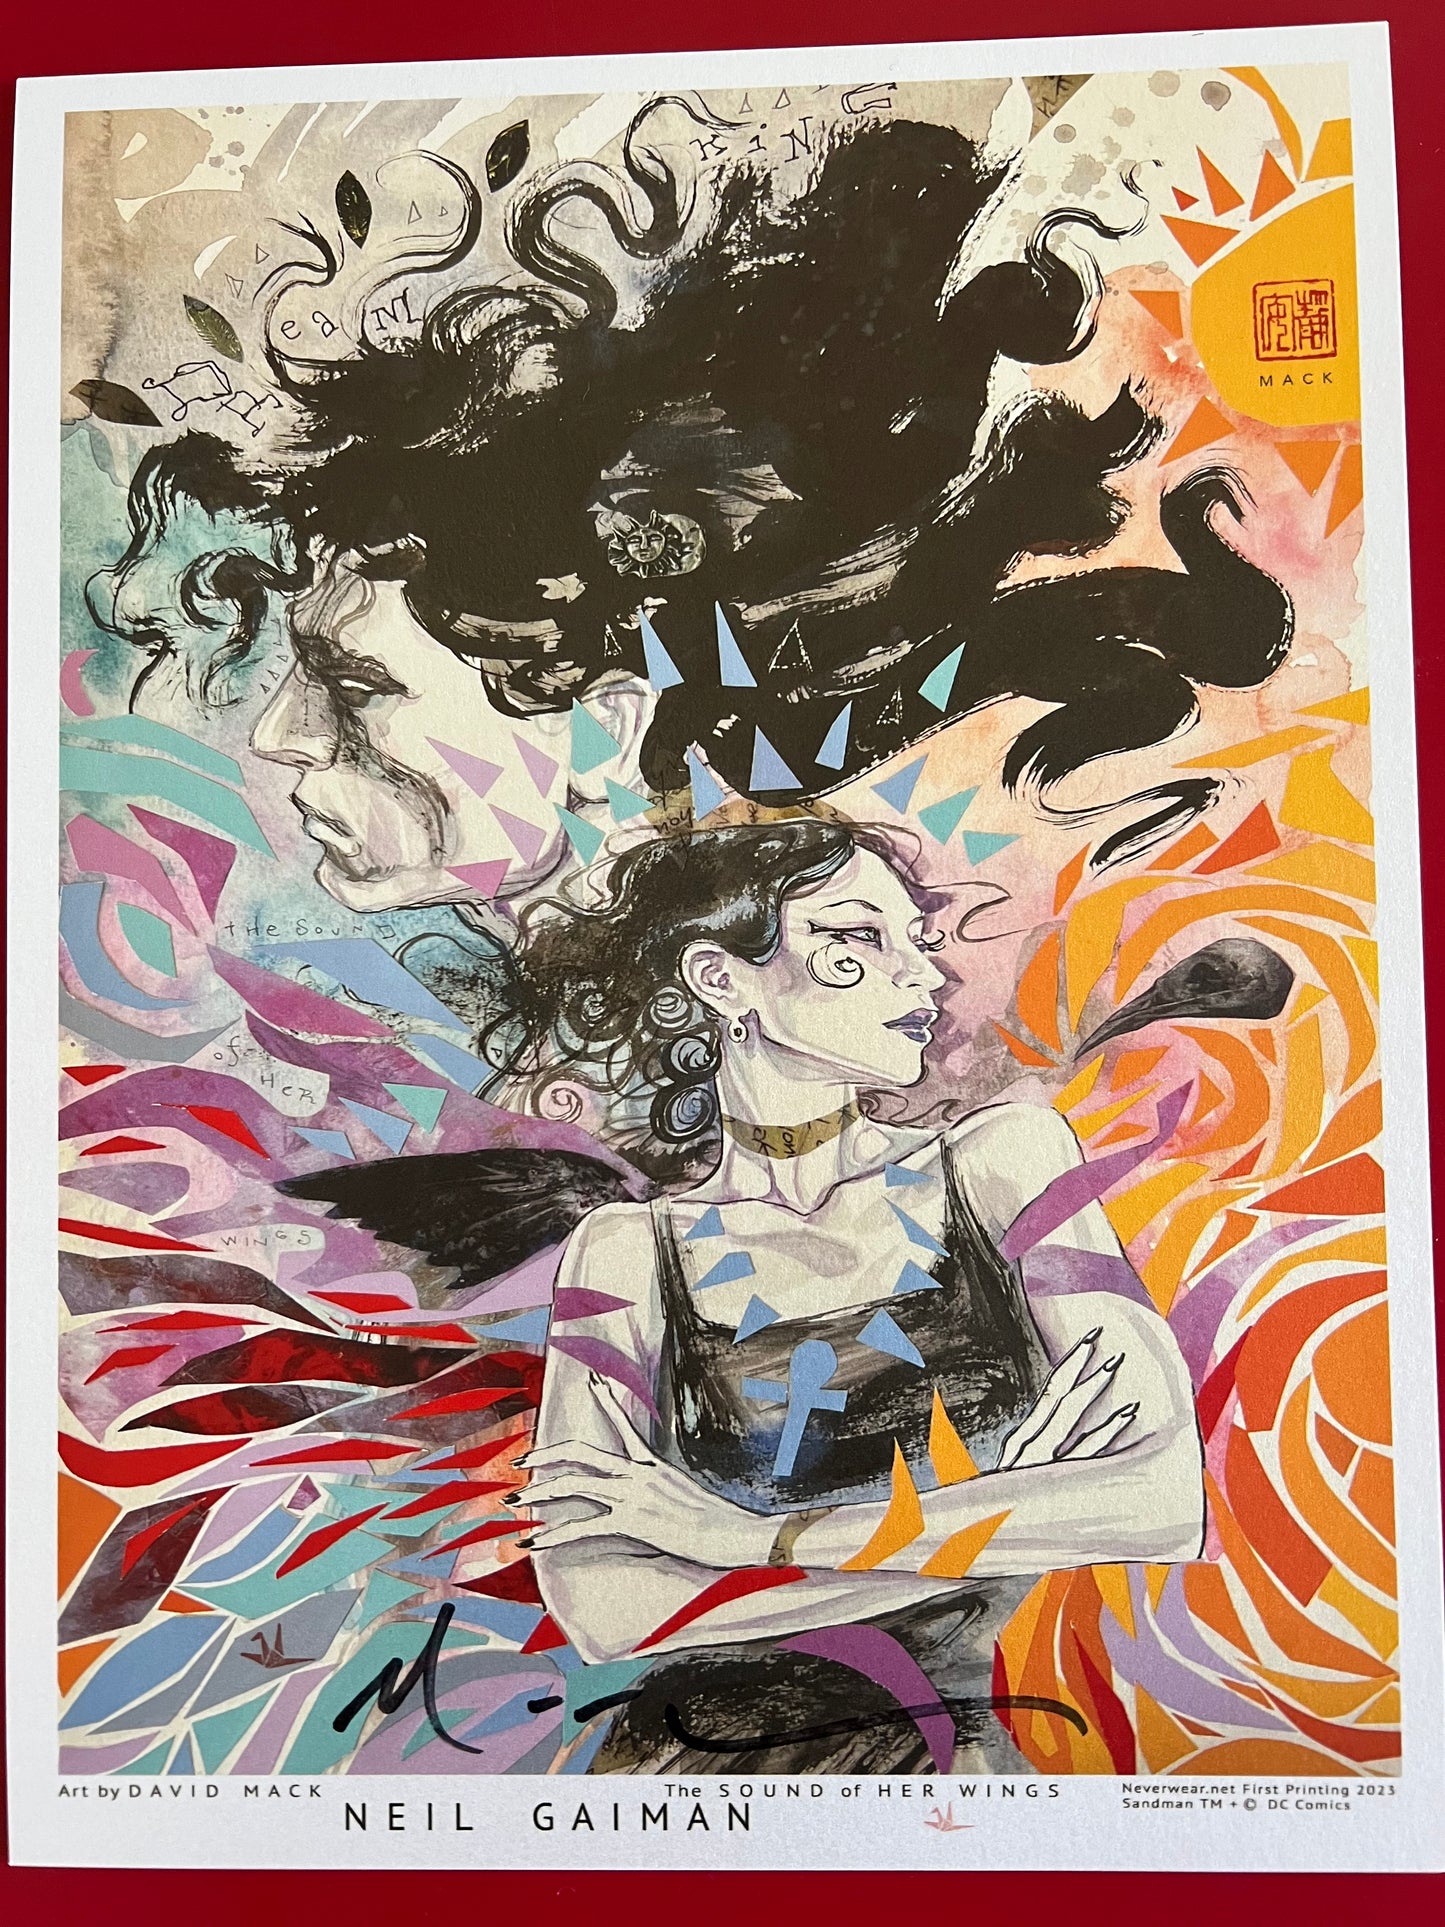 BRAND NEW!!! David Mack paints Death and Dream Together